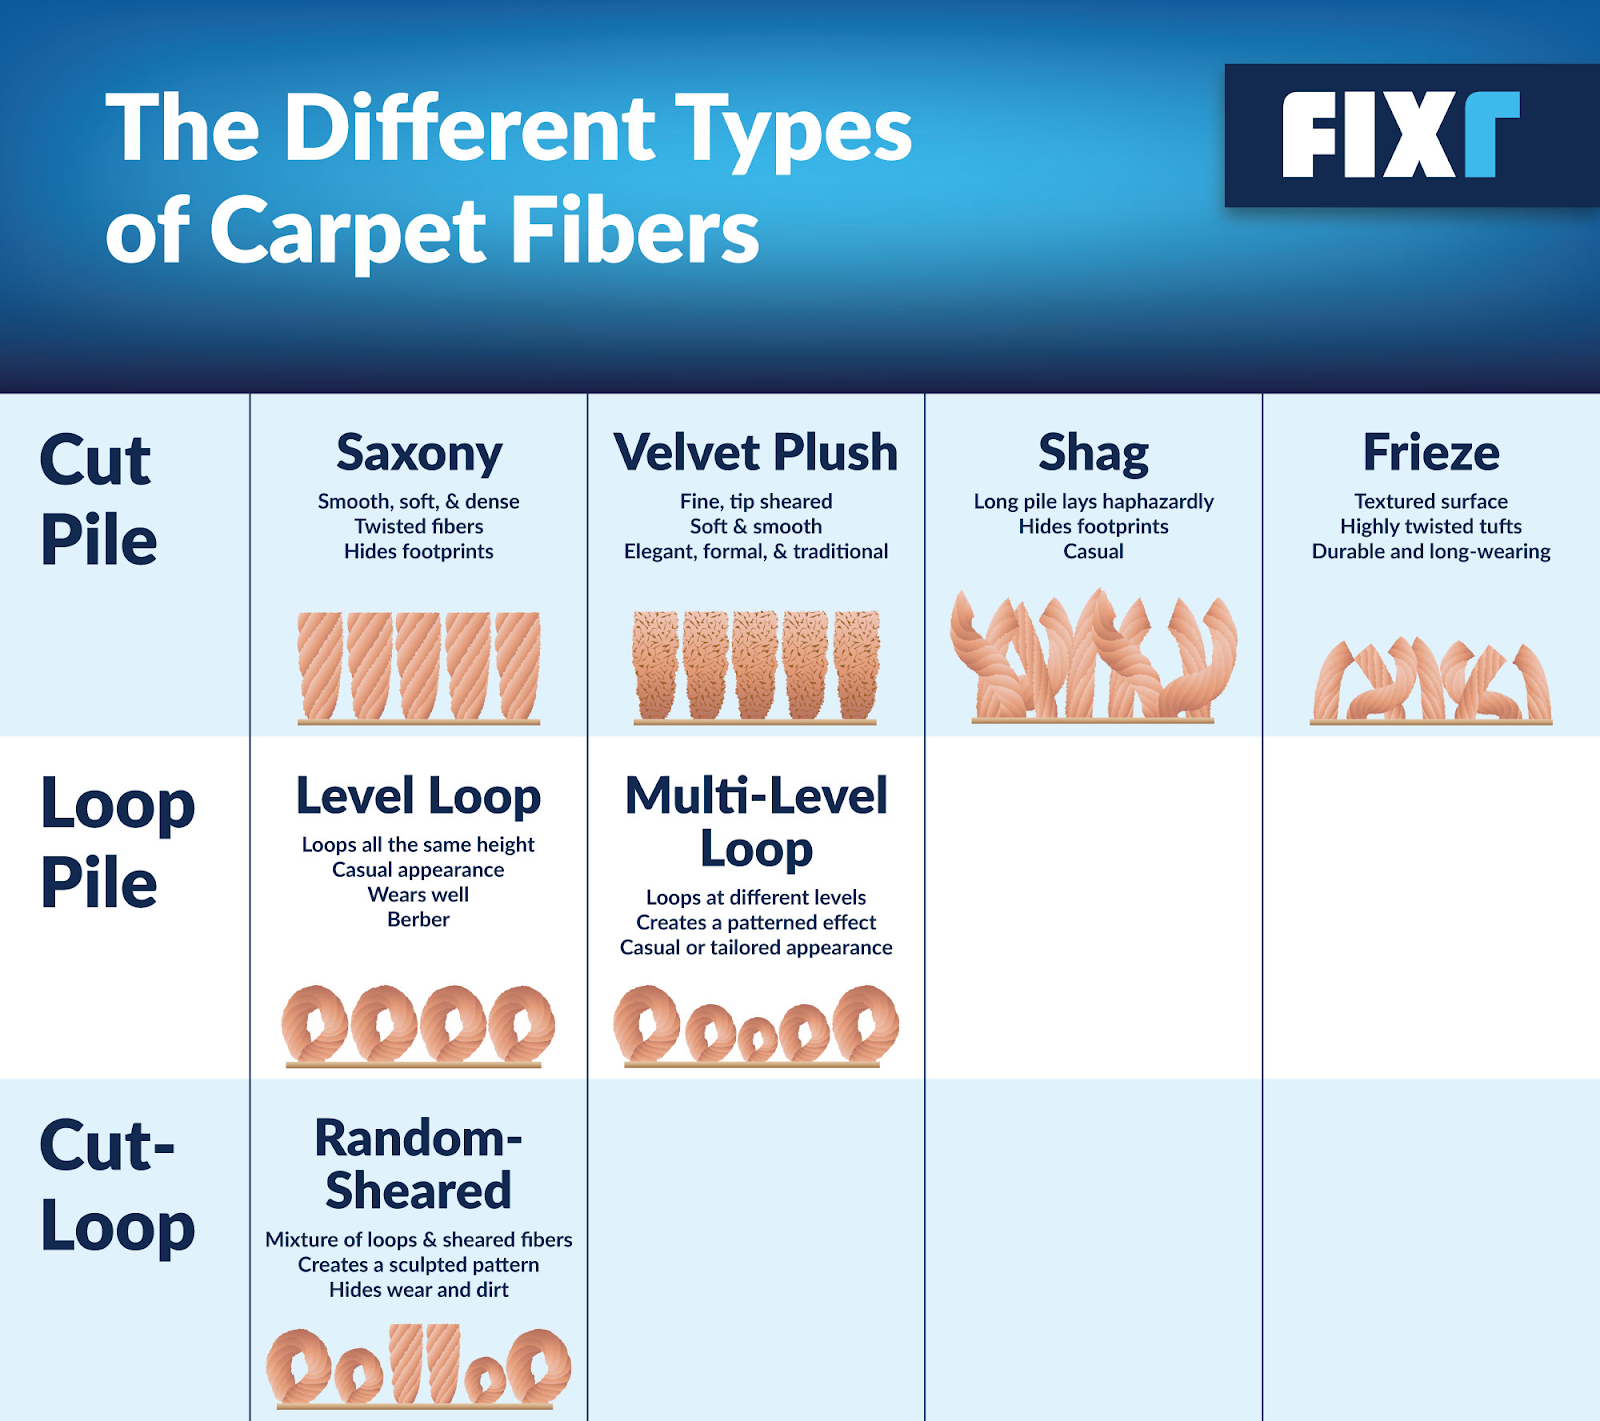 Fixr Com How Much Does It Cost To Install New Carpeting